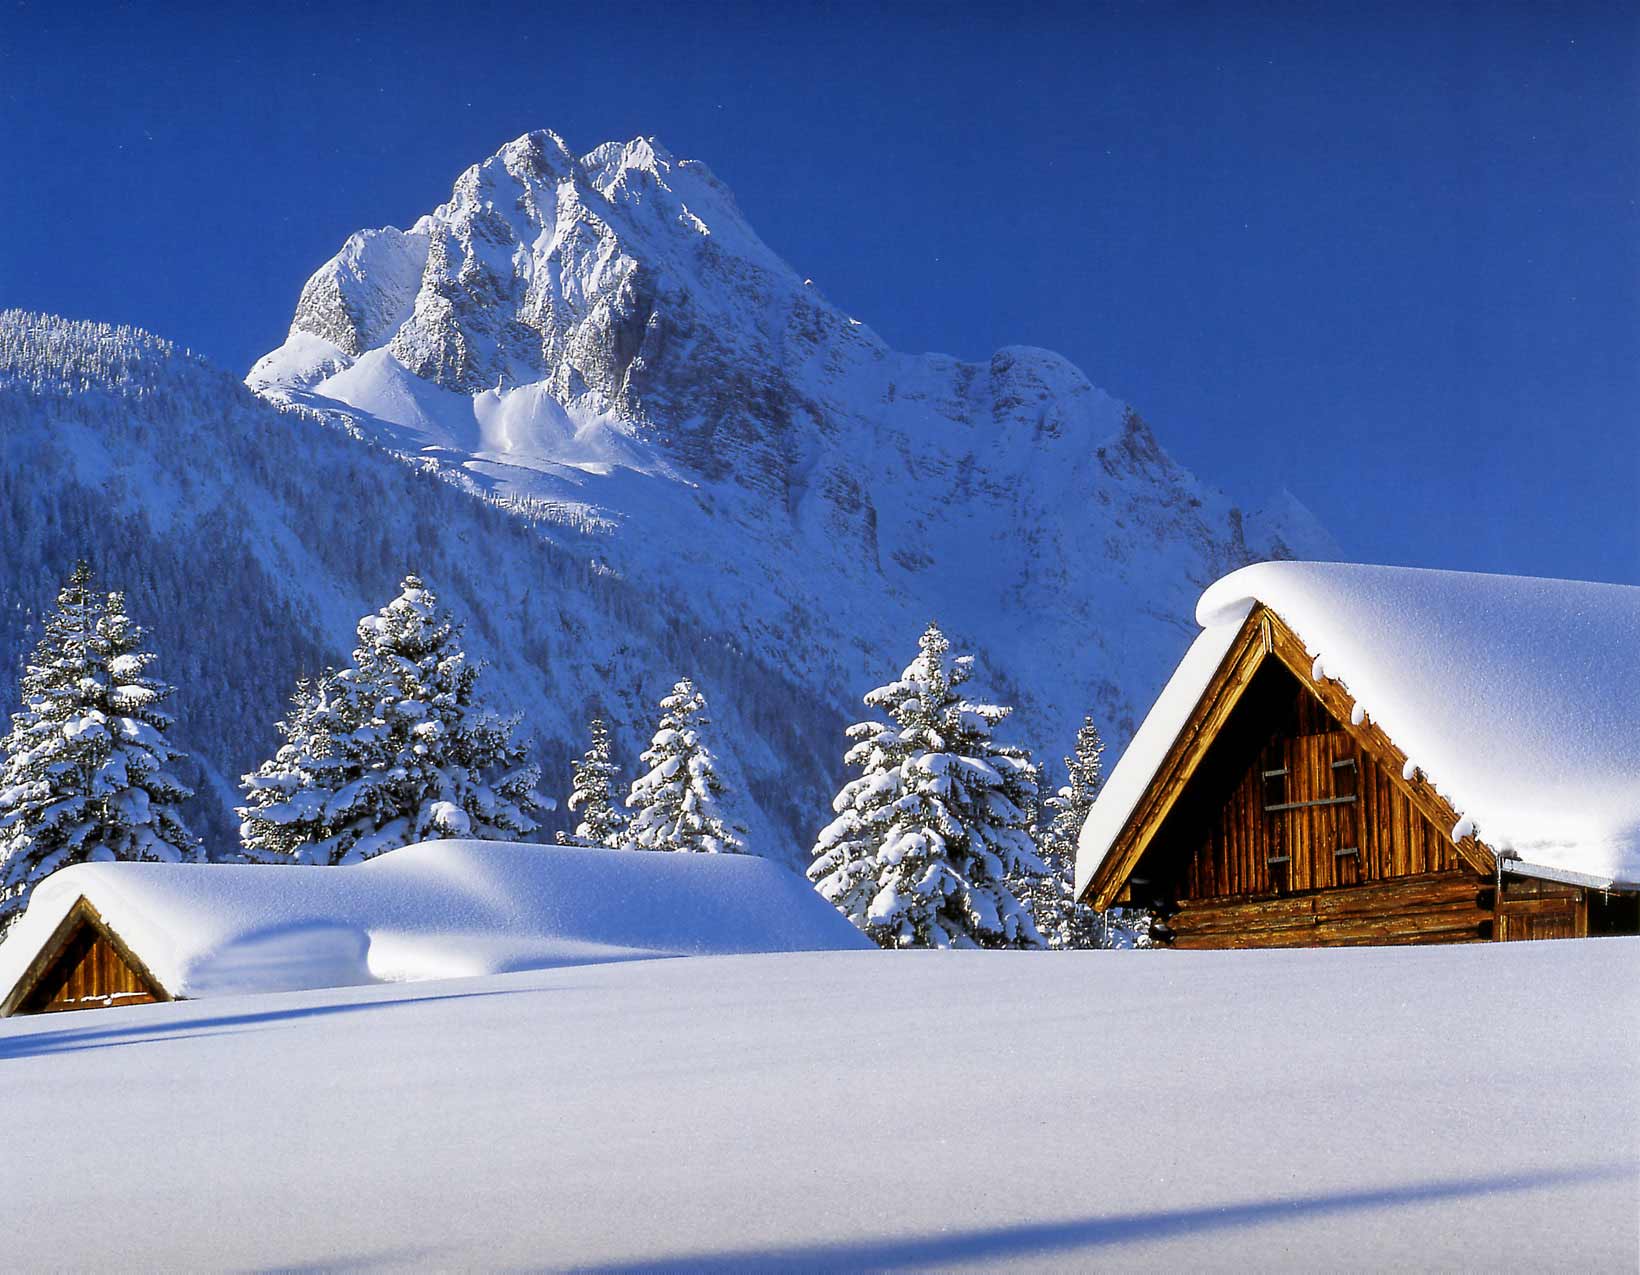 Winter Snow In House Wallpaper